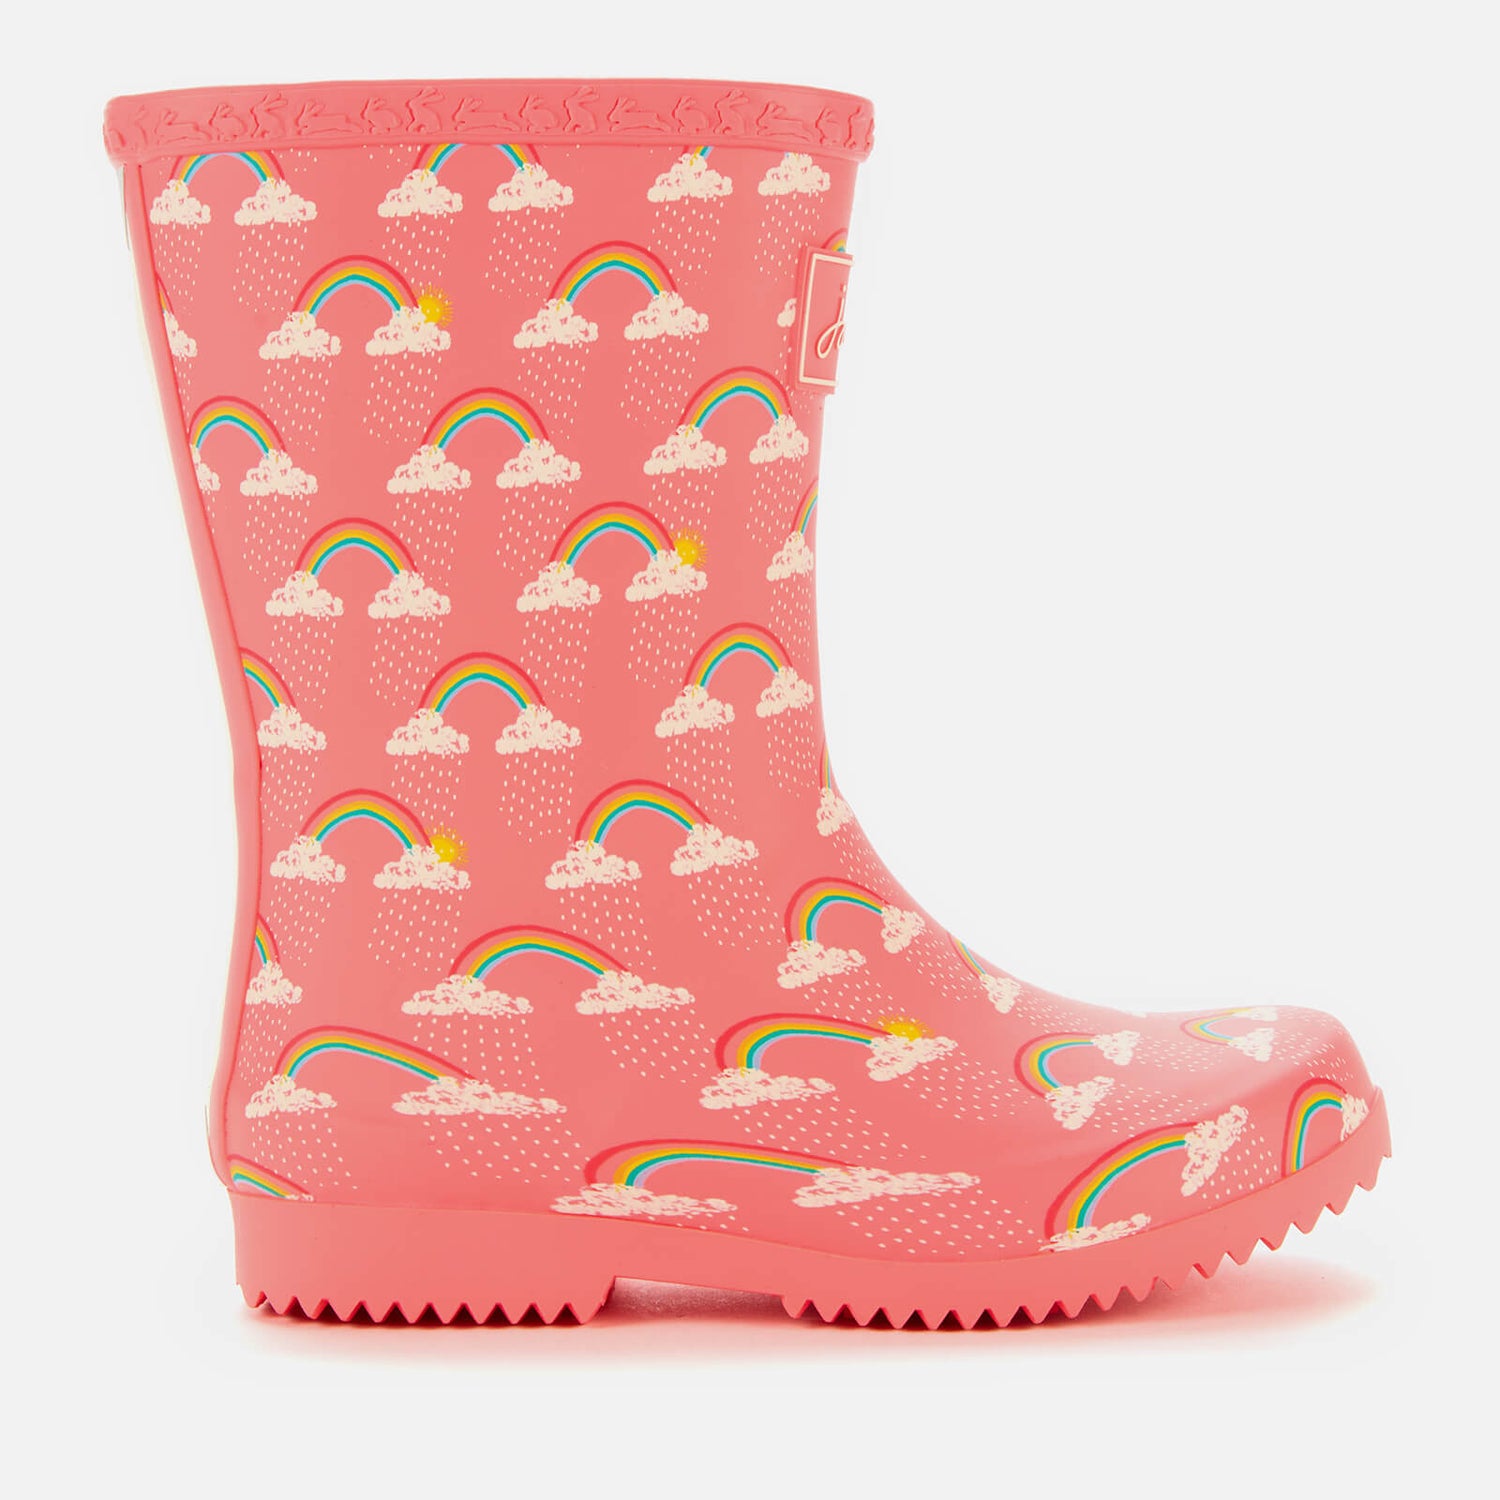 Joules Kids' Roll Up Wellies - Pink Rain Clouds